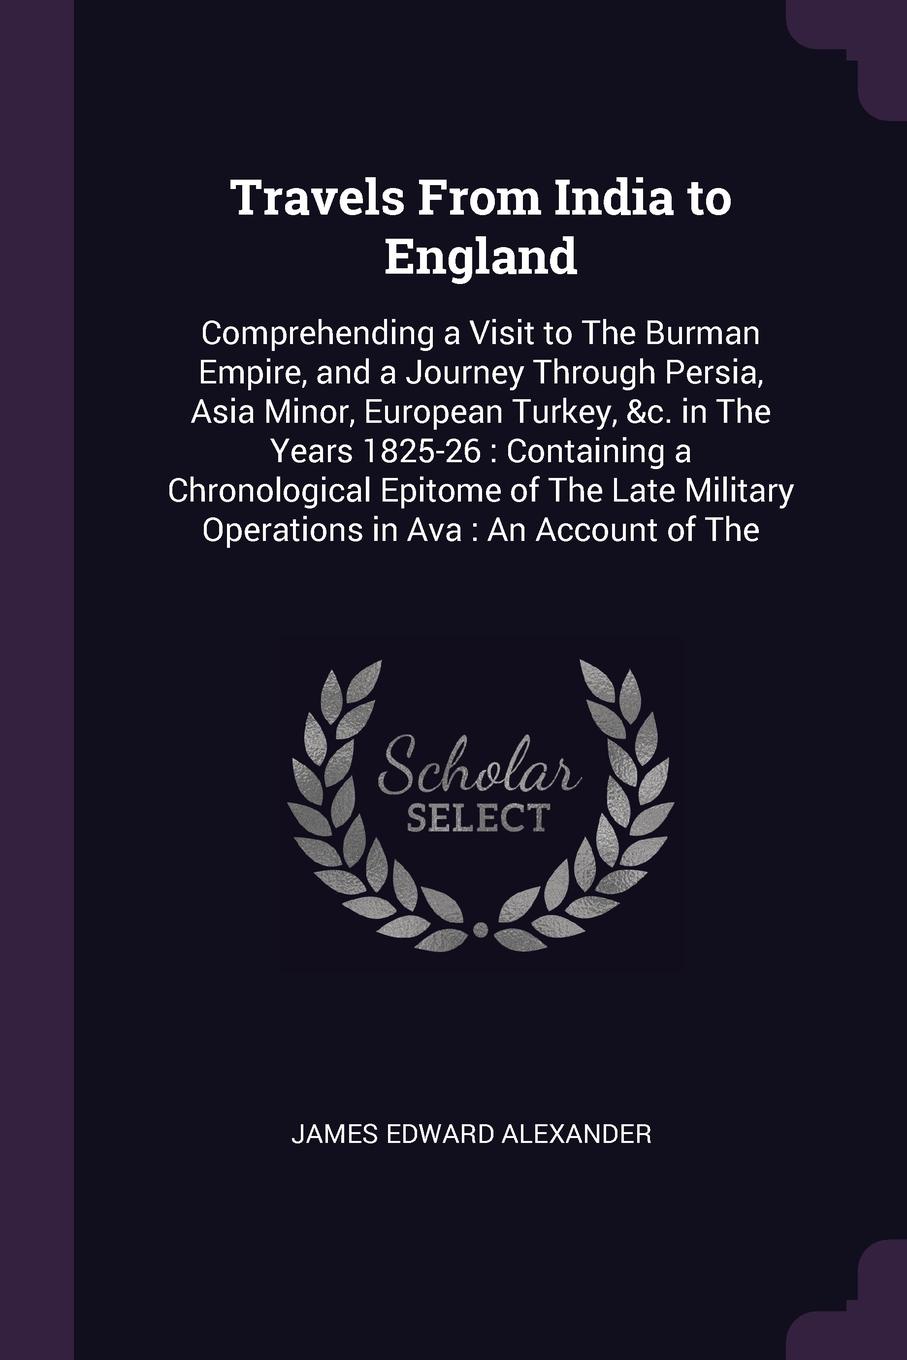 Travels From India to England. Comprehending a Visit to The Burman Empire, and a Journey Through Persia, Asia Minor, European Turkey, &c. in The Years 1825-26 : Containing a Chronological Epitome of The Late Military Operations in Ava : An Account...